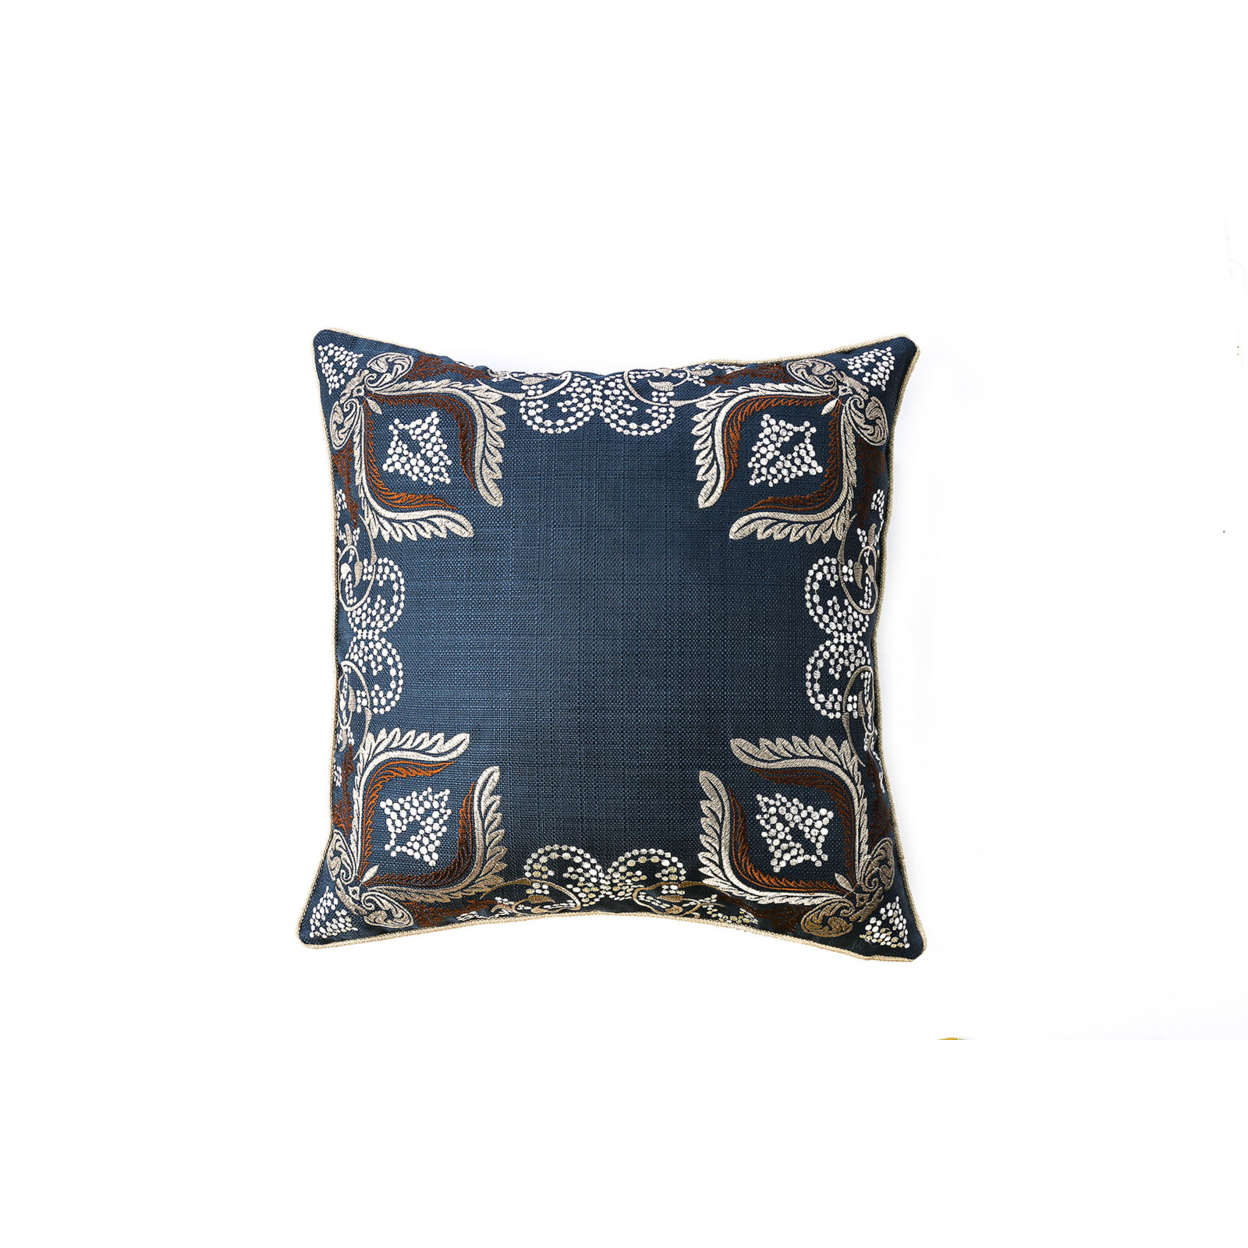 Contemporary Style Set Of 2 Throw Pillows With Foliage And Feather Designs, Navy Blue- Saltoro Sherpi